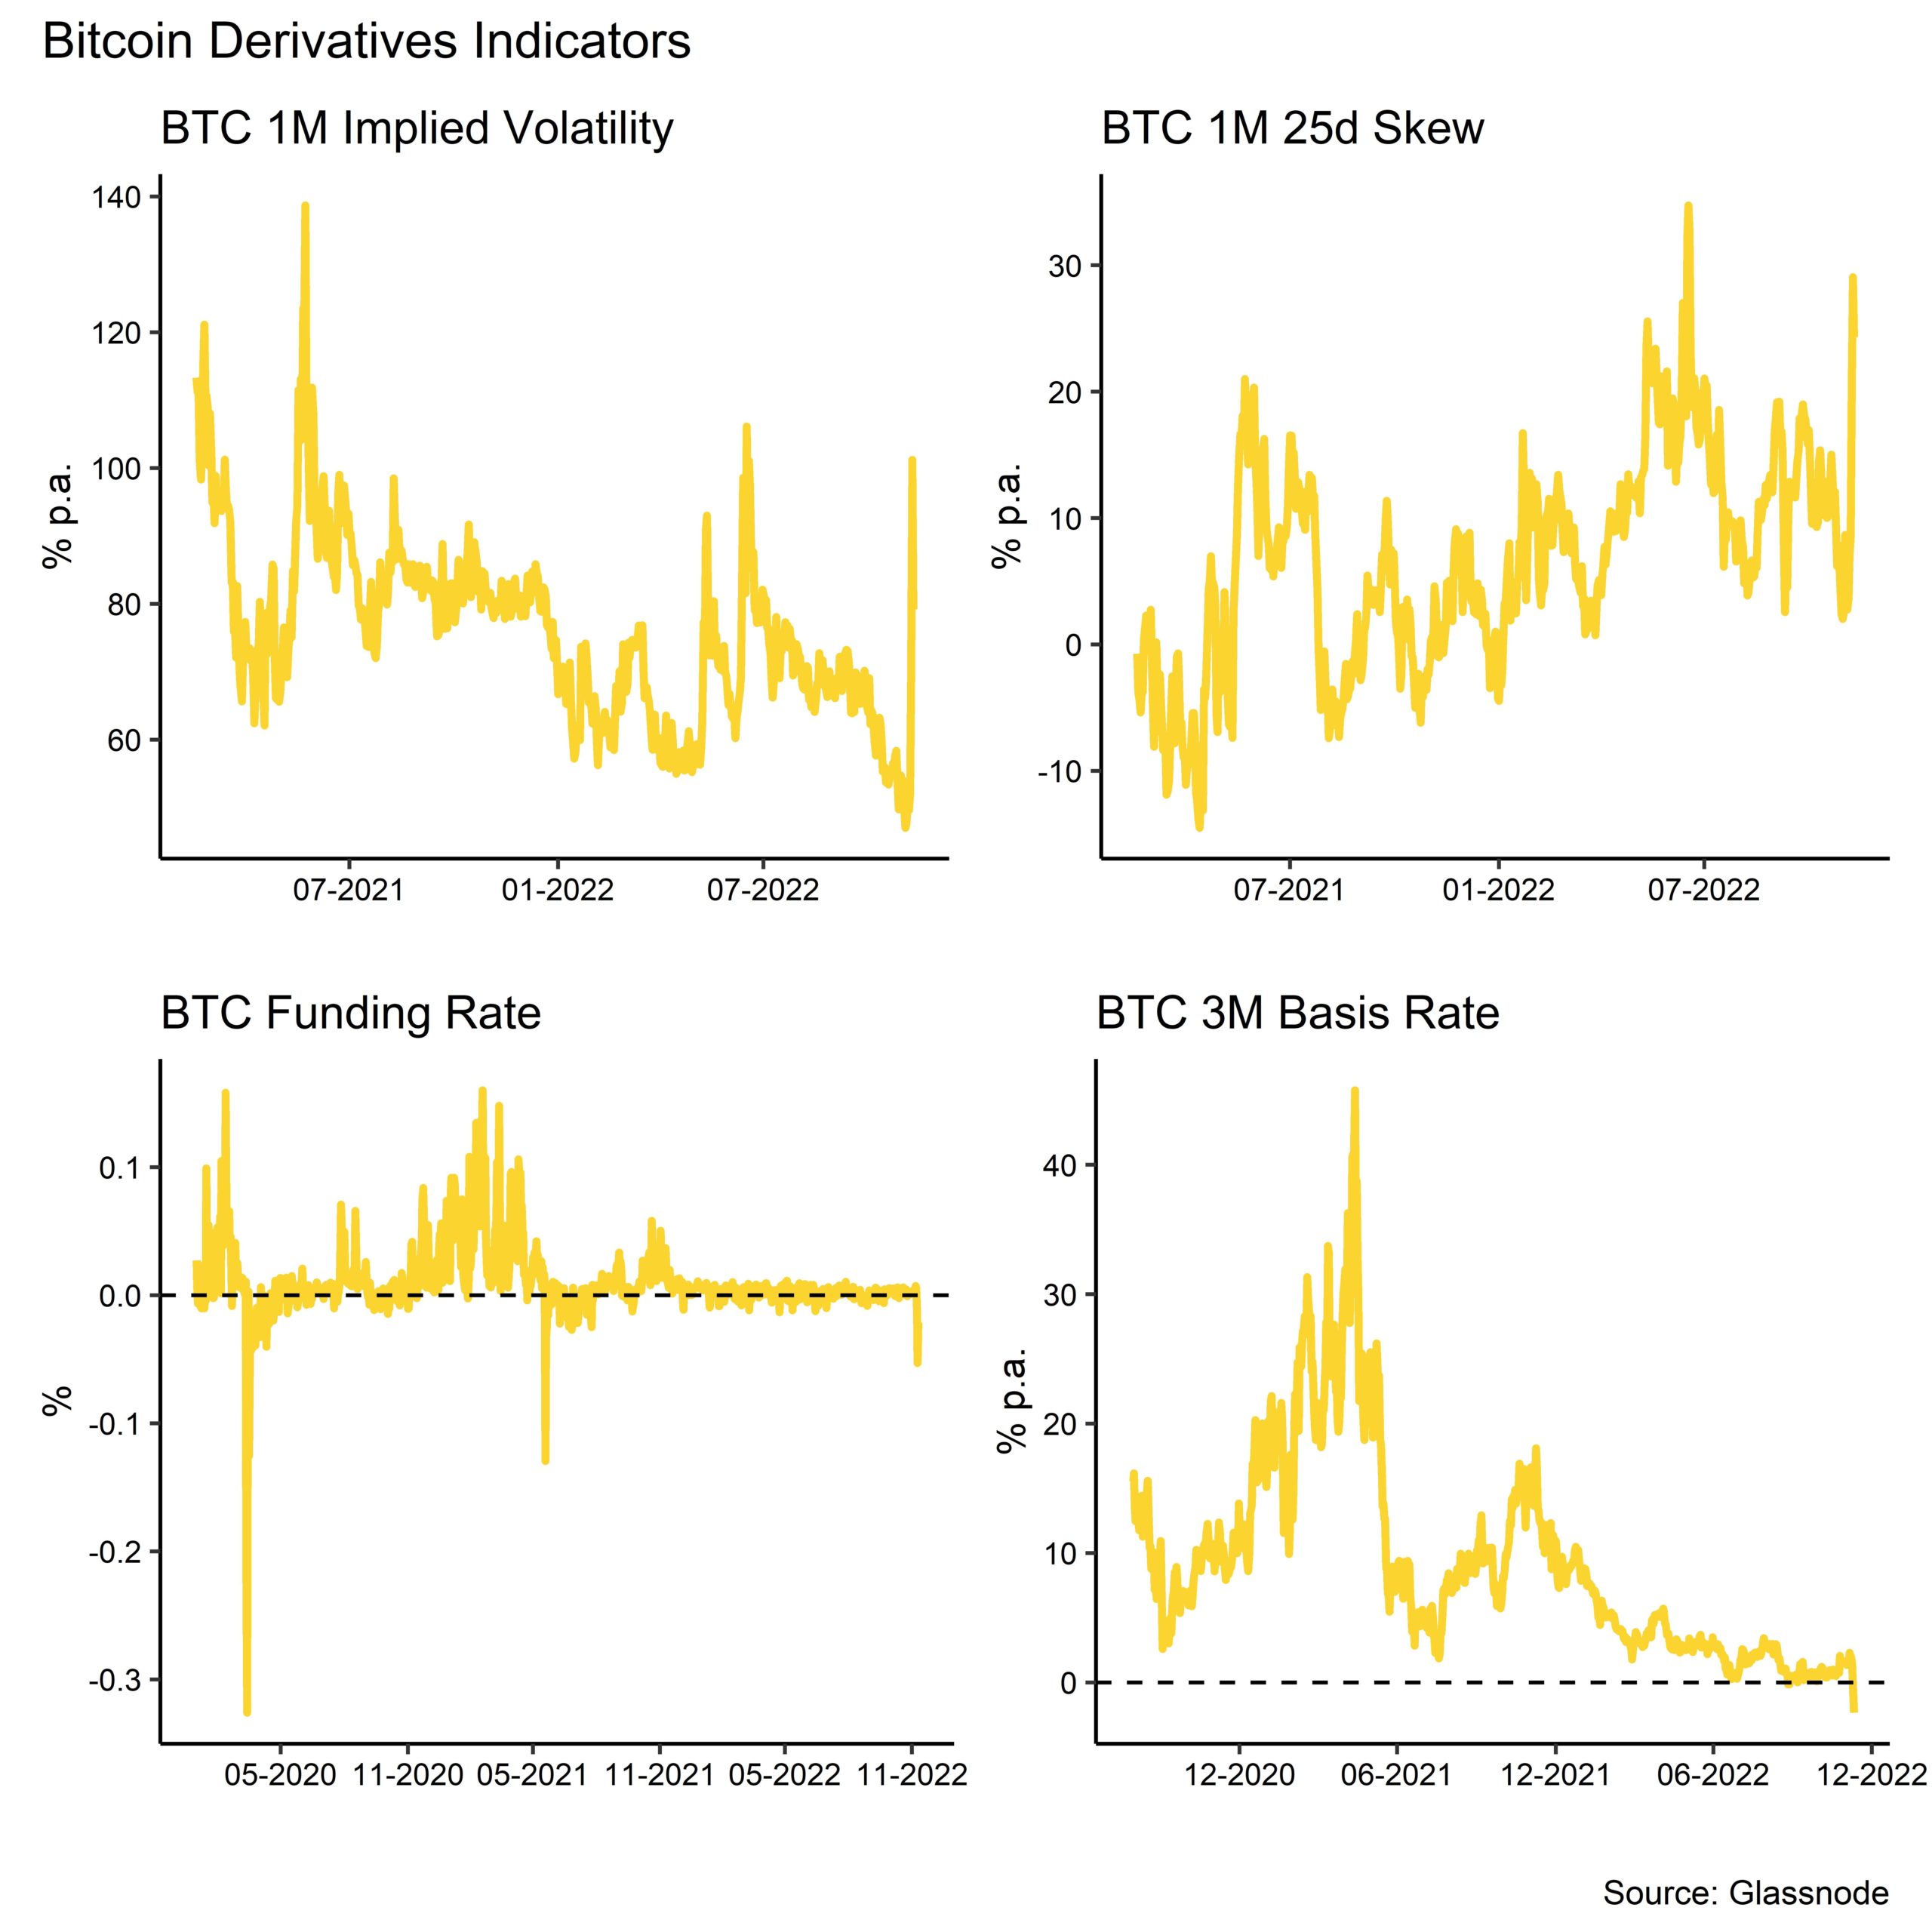  Iconic Crypto Espresso - FTX Post-Mortem: Is the cyclical bottom finally in?Bitcoin Derivatives Indicators 